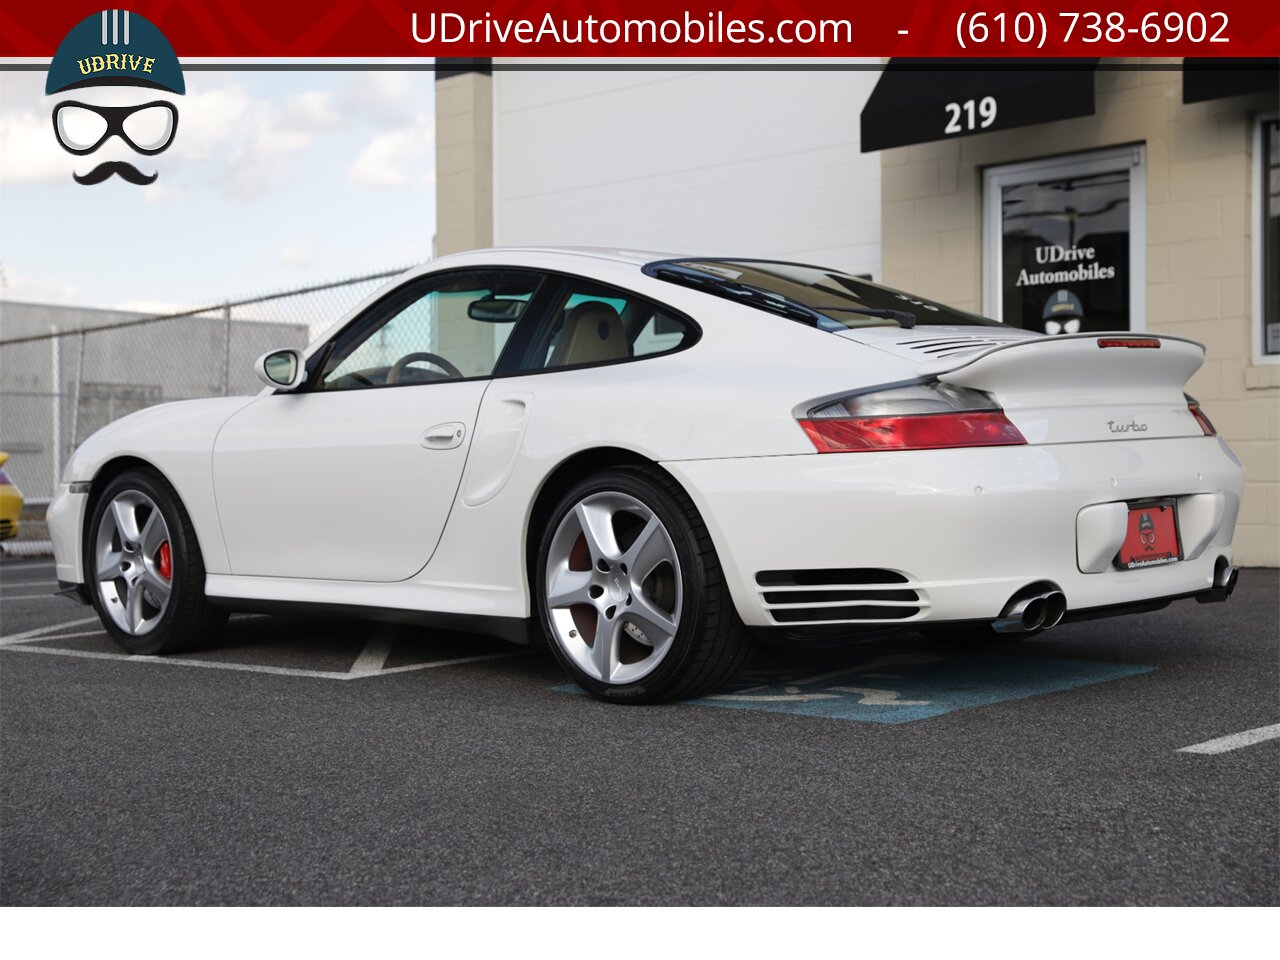 2003 Porsche 911 Turbo 996 6 Speed Carrara White Sport Seats  Detailed Service History - Photo 23 - West Chester, PA 19382